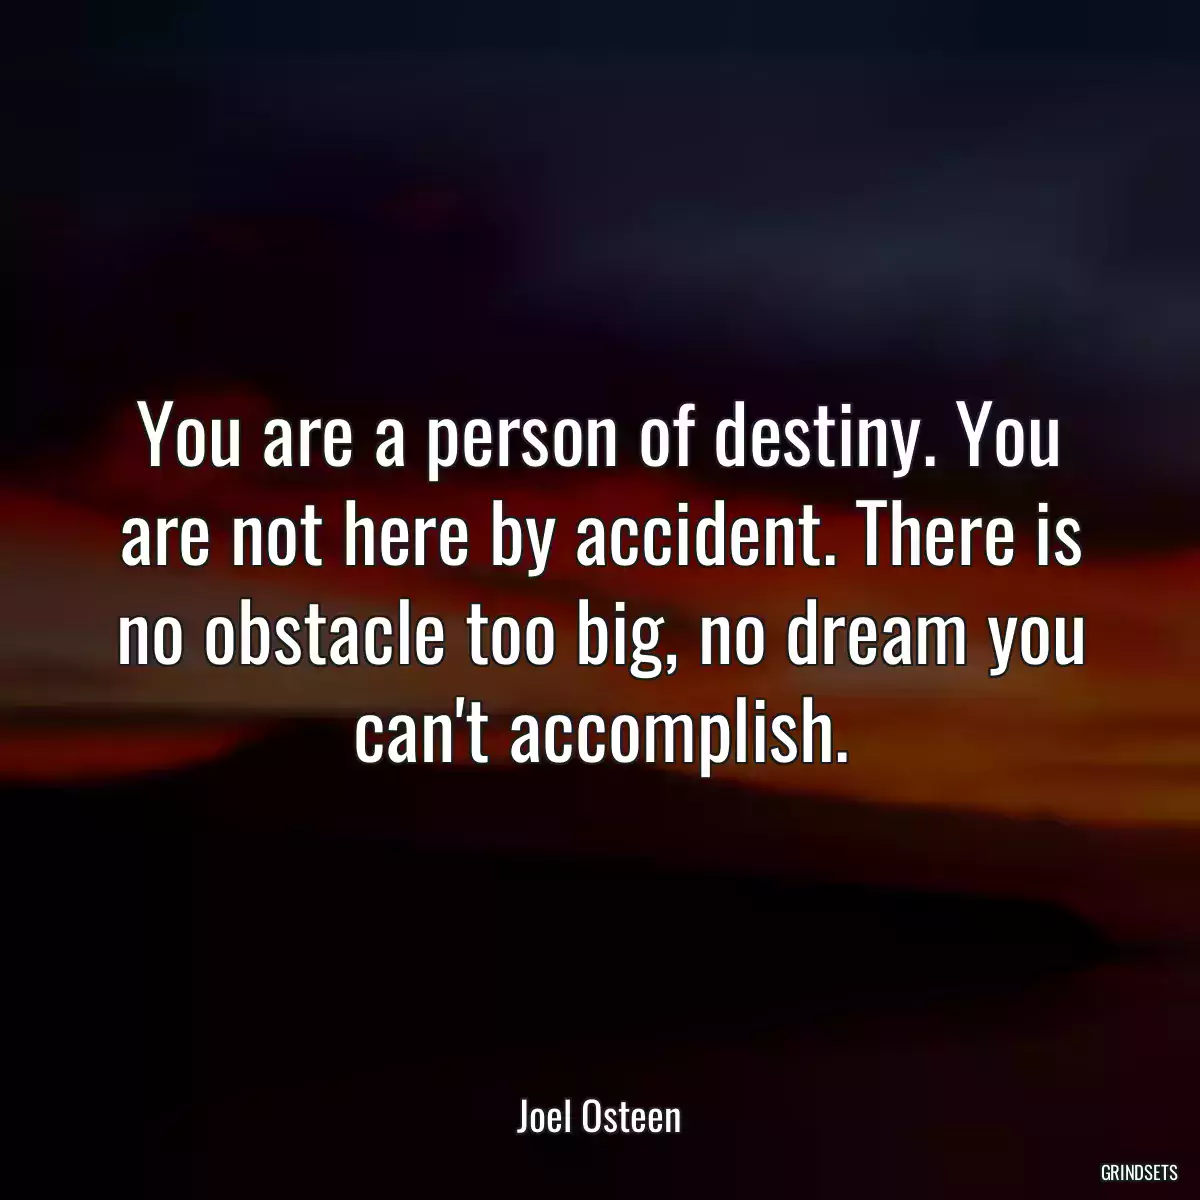 You are a person of destiny. You are not here by accident. There is no obstacle too big, no dream you can\'t accomplish.